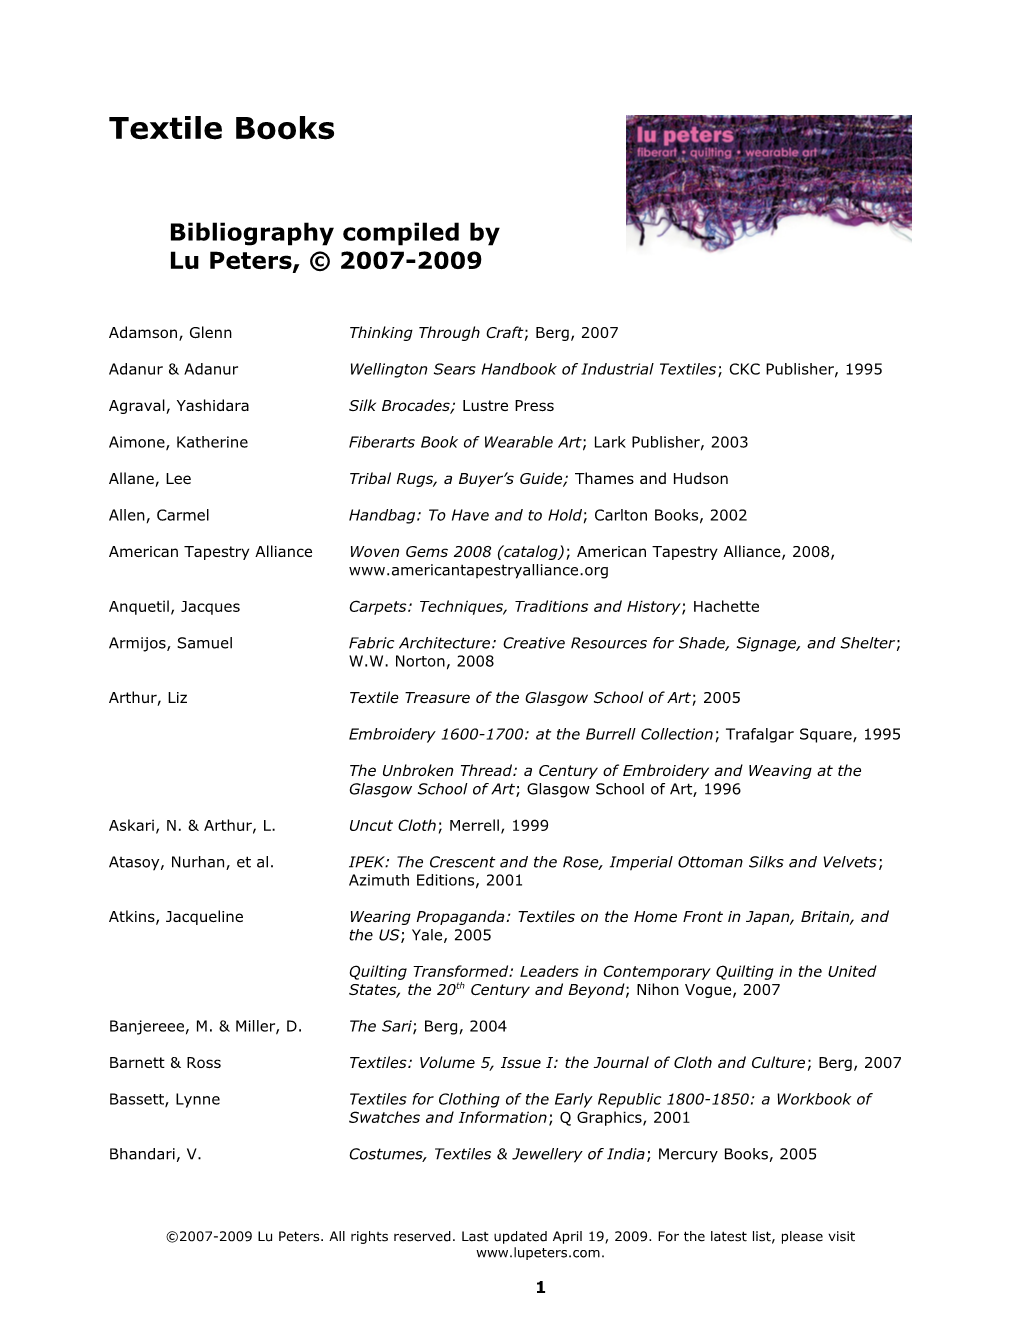 Bibliography Compiled by Lu Peters, 2007-2009